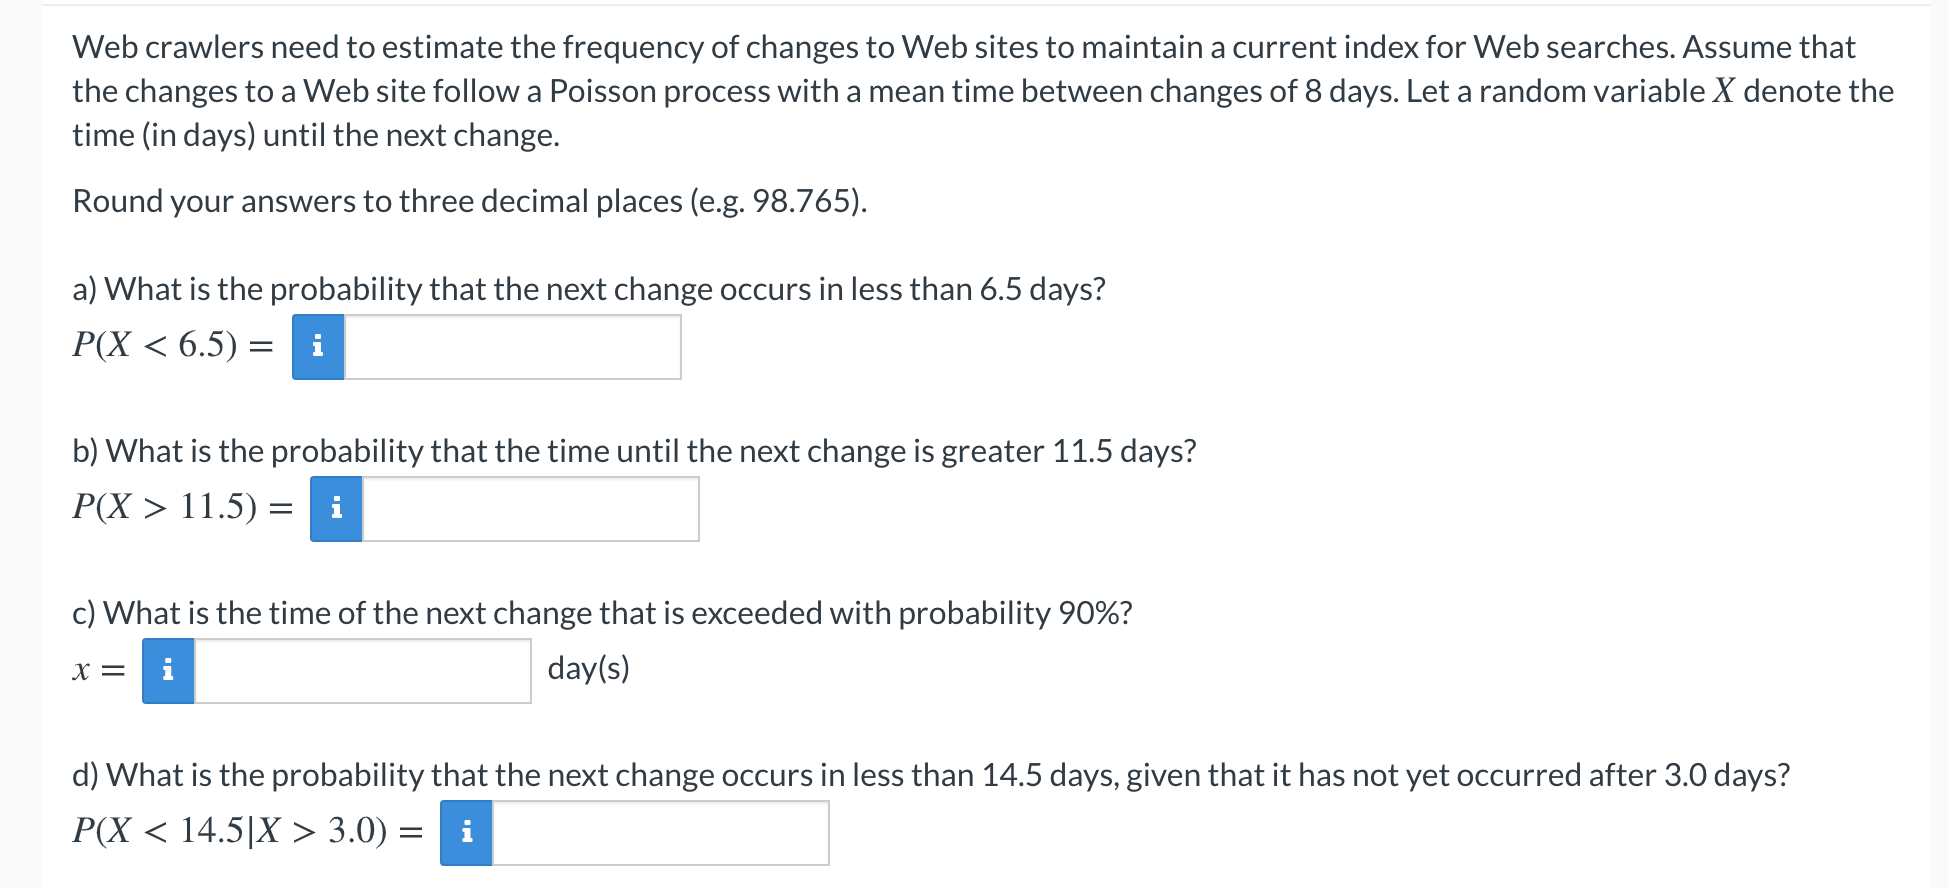 Web crawlers need to estimate the frequency of changes to Web sites to maintain a current index for Web searches. Assume that
the changes to a Web site follow a Poisson process with a mean time between changes of 8 days. Let a random variable X denote the
time (in days) until the next change.
Round your answers to three decimal places (e.g. 98.765).
a) What is the probability that the next change occurs in less than 6.5 days?
P(X < 6.5) = i
b) What is the probability that the time until the next change is greater 11.5 days?
P(X > 11.5) = i
c) What is the time of the next change that is exceeded with probability 90%?
X =
i
day(s)
d) What is the probability that the next change occurs in less than 14.5 days, given that it has not yet occurred after 3.0 days?
P(X < 14.5|X > 3.0) =
i
